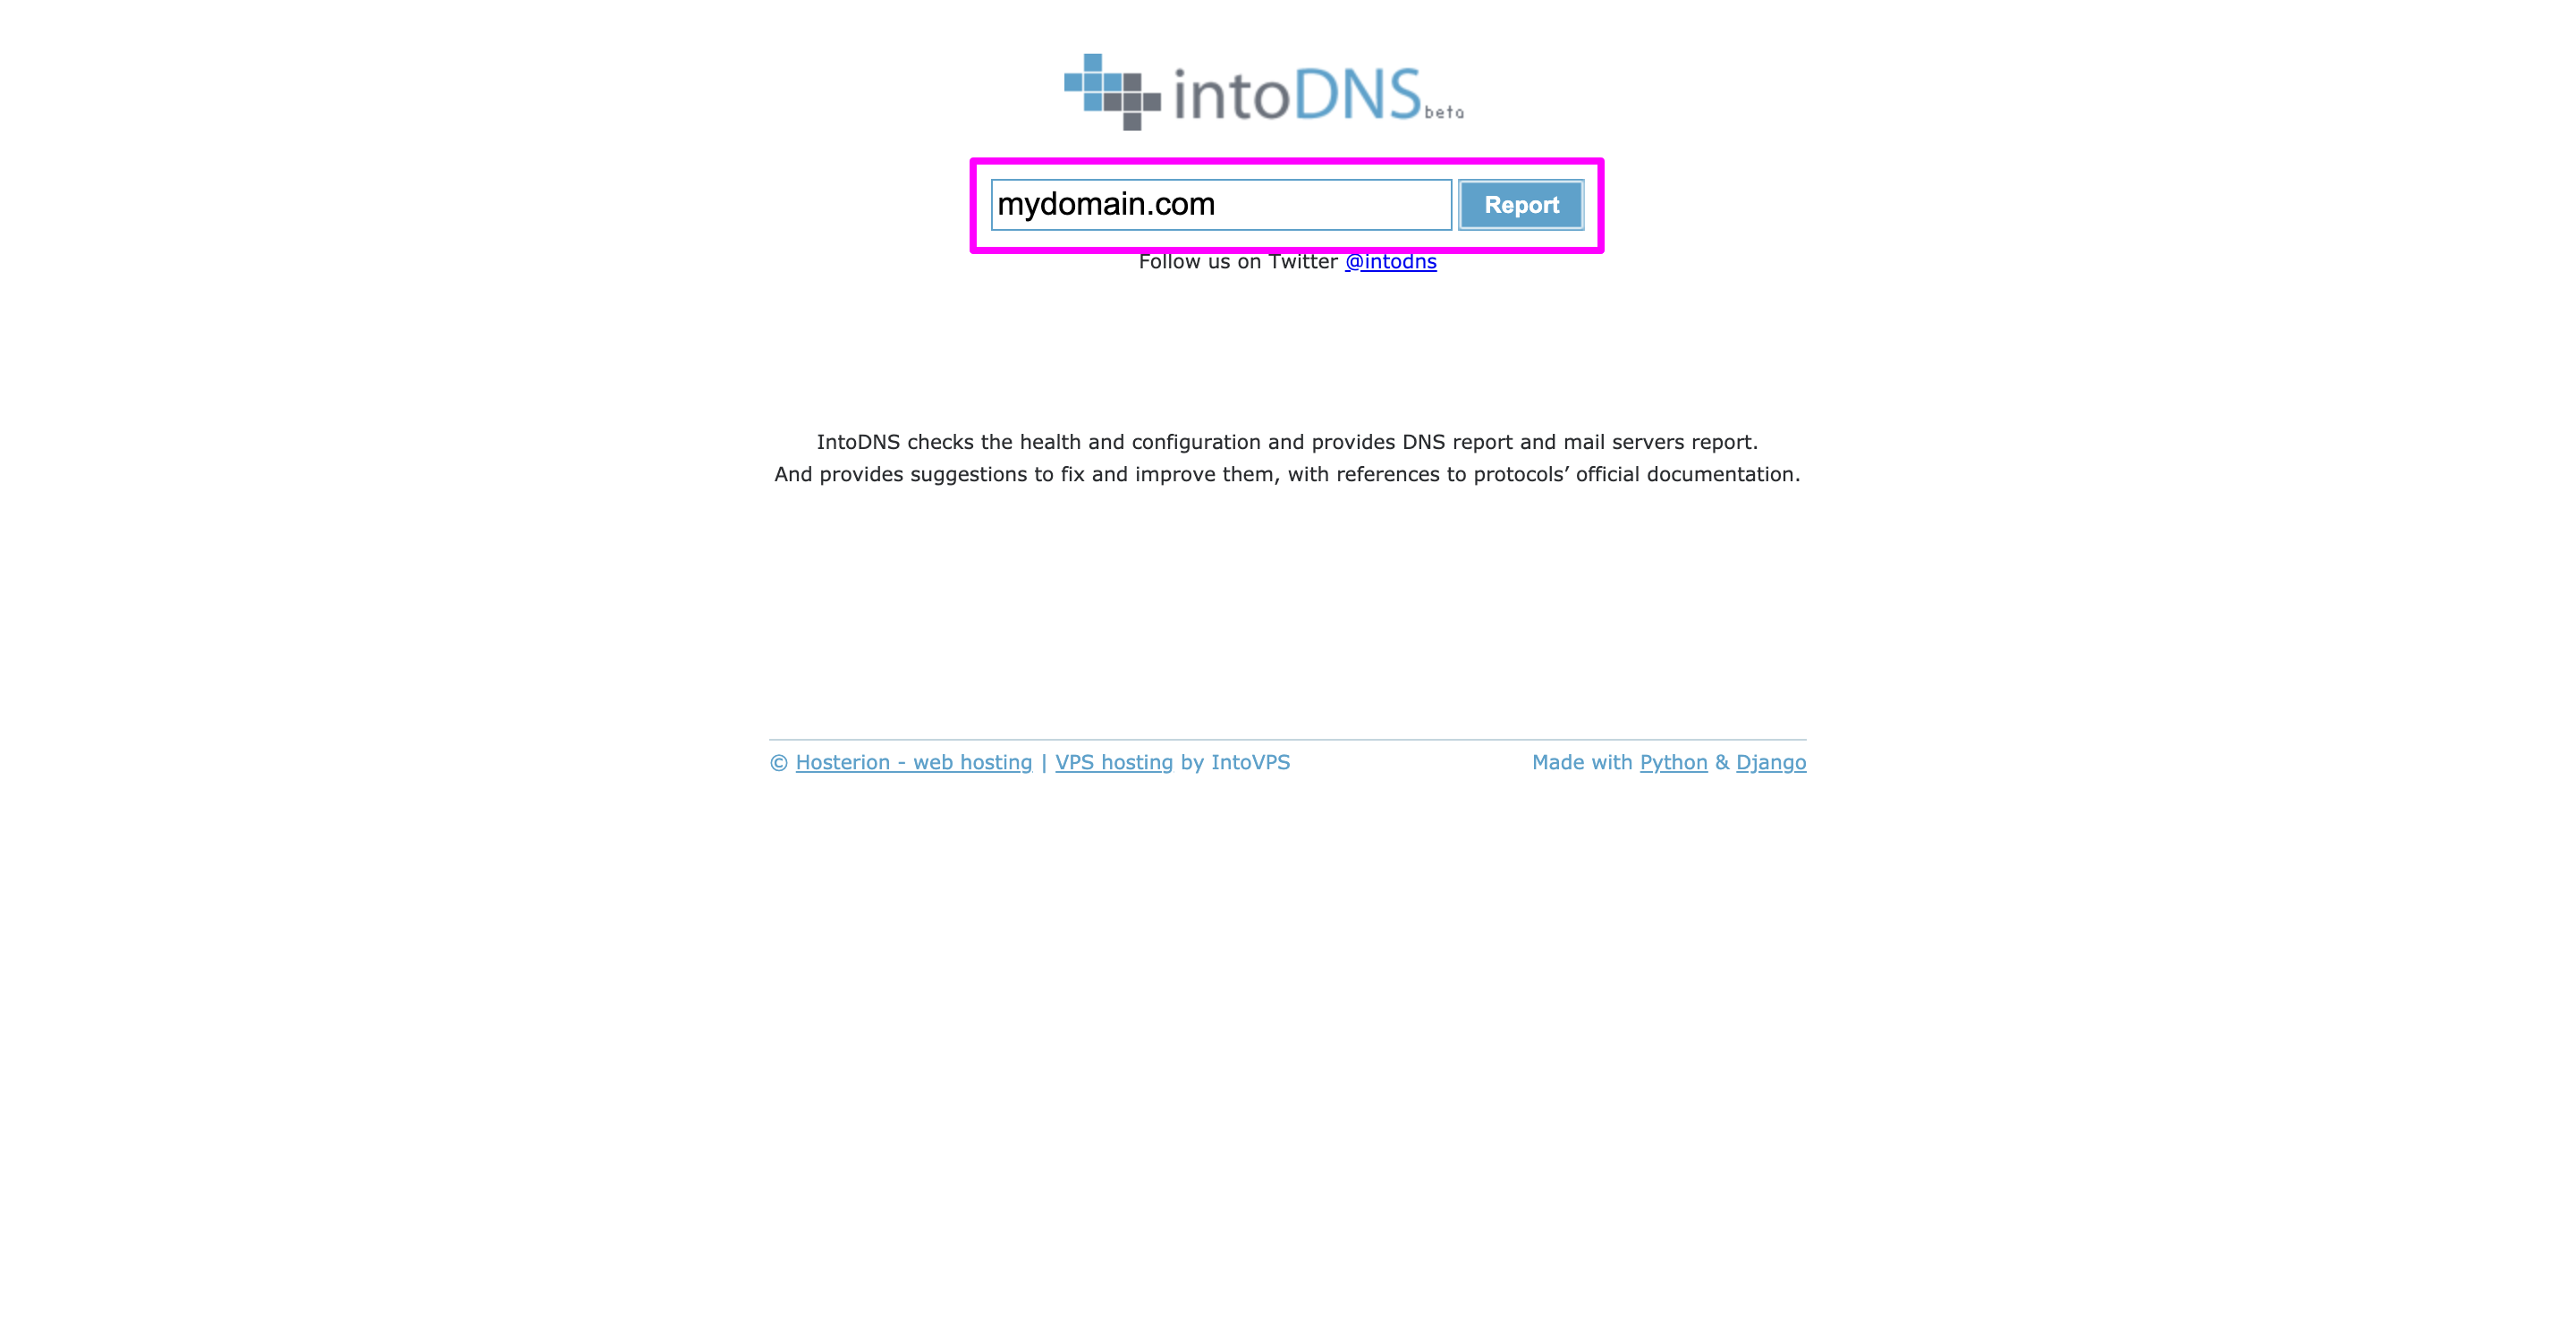 Entering domain name in IntoDNS for getting the DNS and Mail server report.